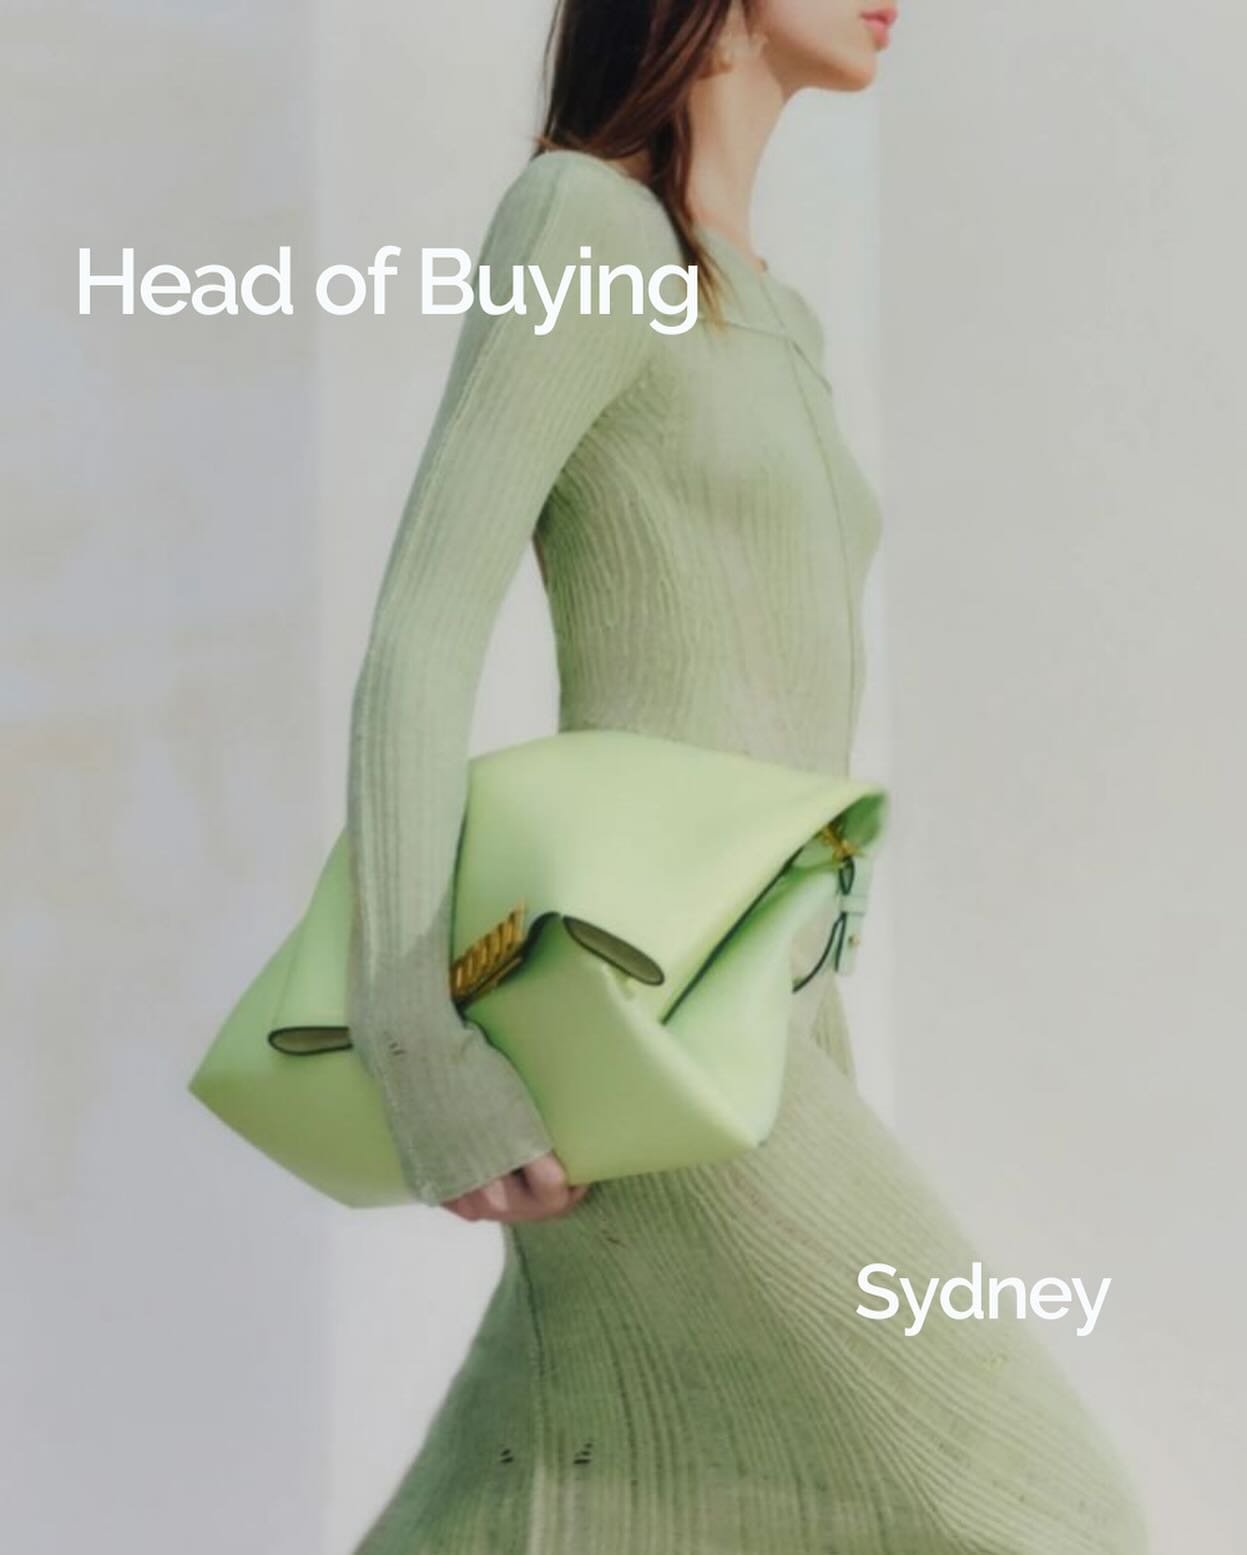 We have a Head of Buying opportunity based in Sydney for a seasoned senior buyer preferably with experience in ecommerce. Working for an established online retailer who are going from strength to strength, this role is not one to miss!